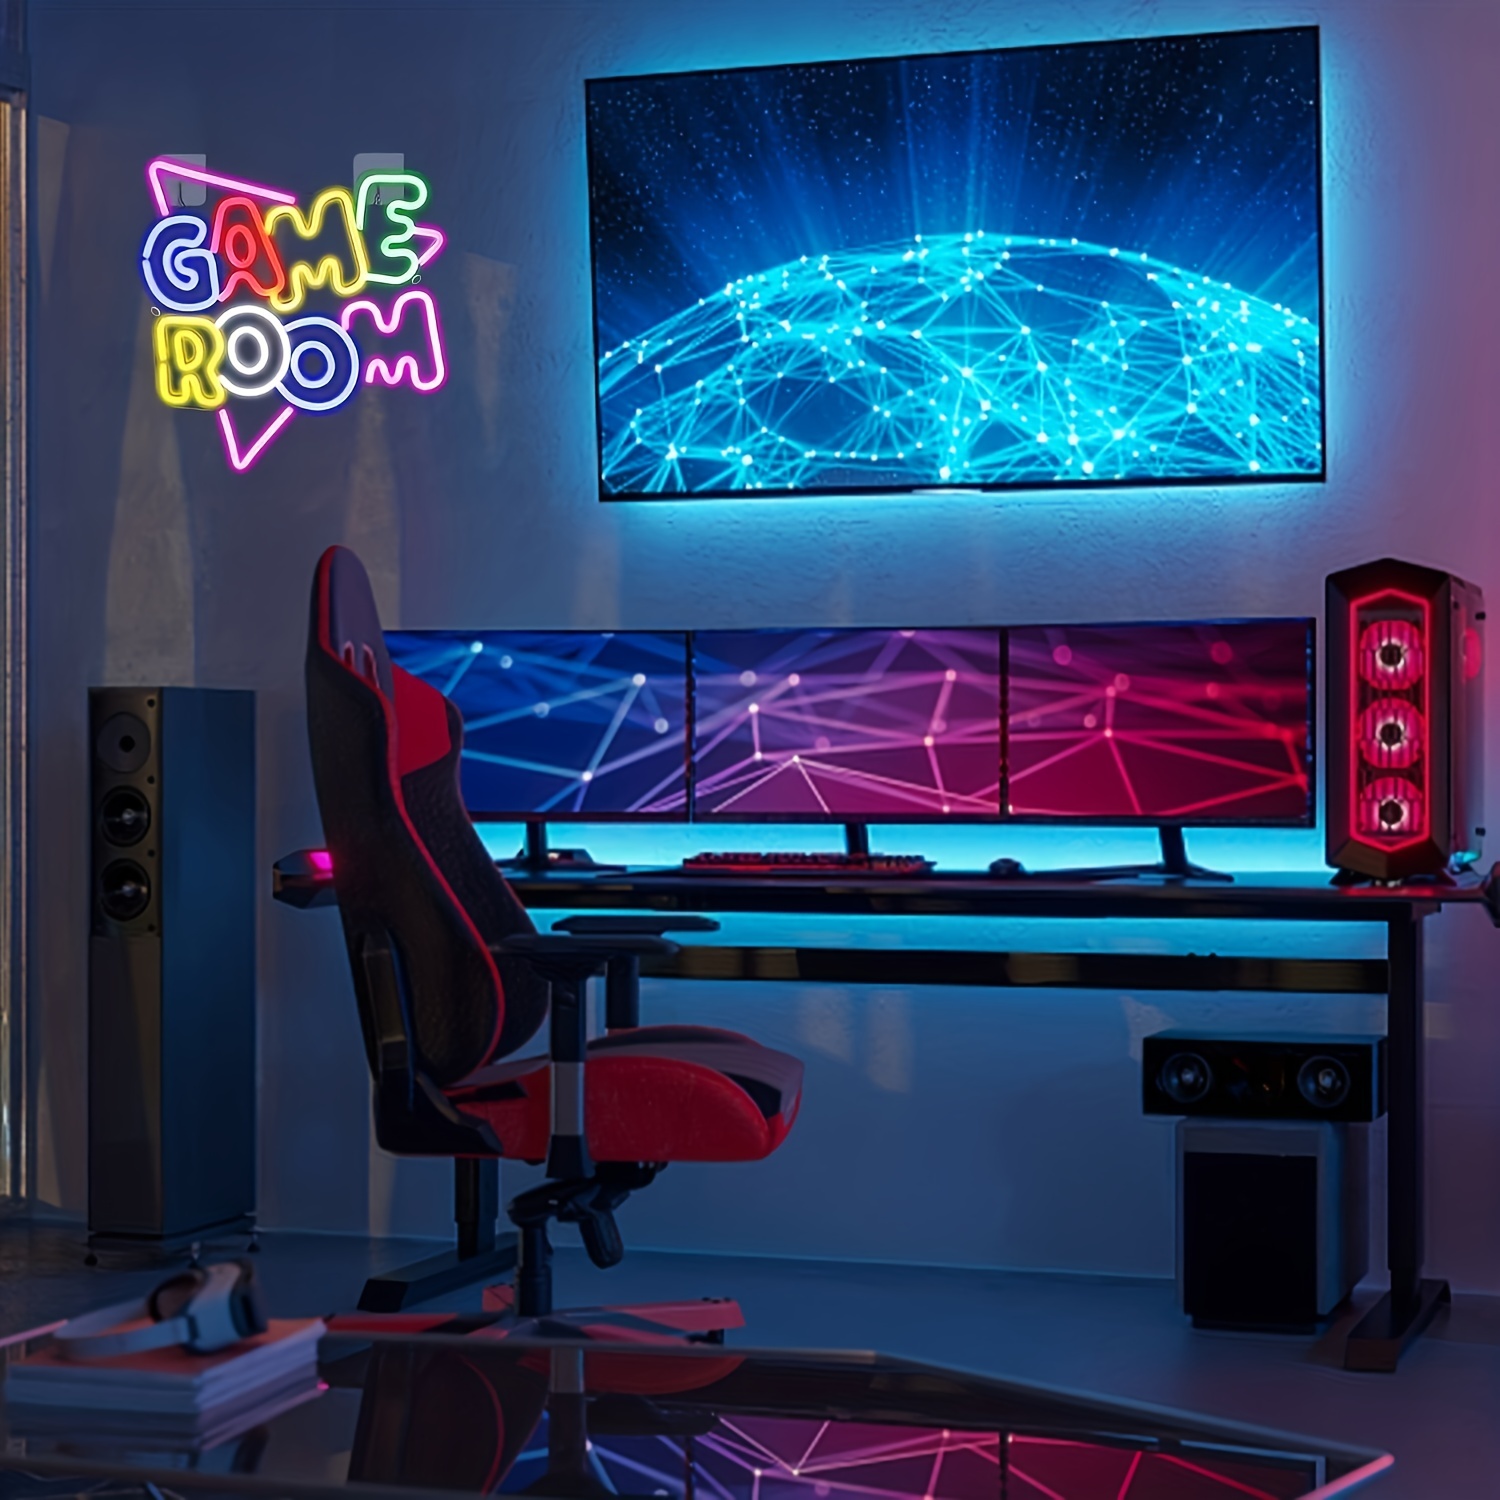 Jeu Neon Gaming Neon Lights Neon Lights Led Neon Lights Wall Decor Neon  Signs Chambre Kids Playground Neon Party Room Decor